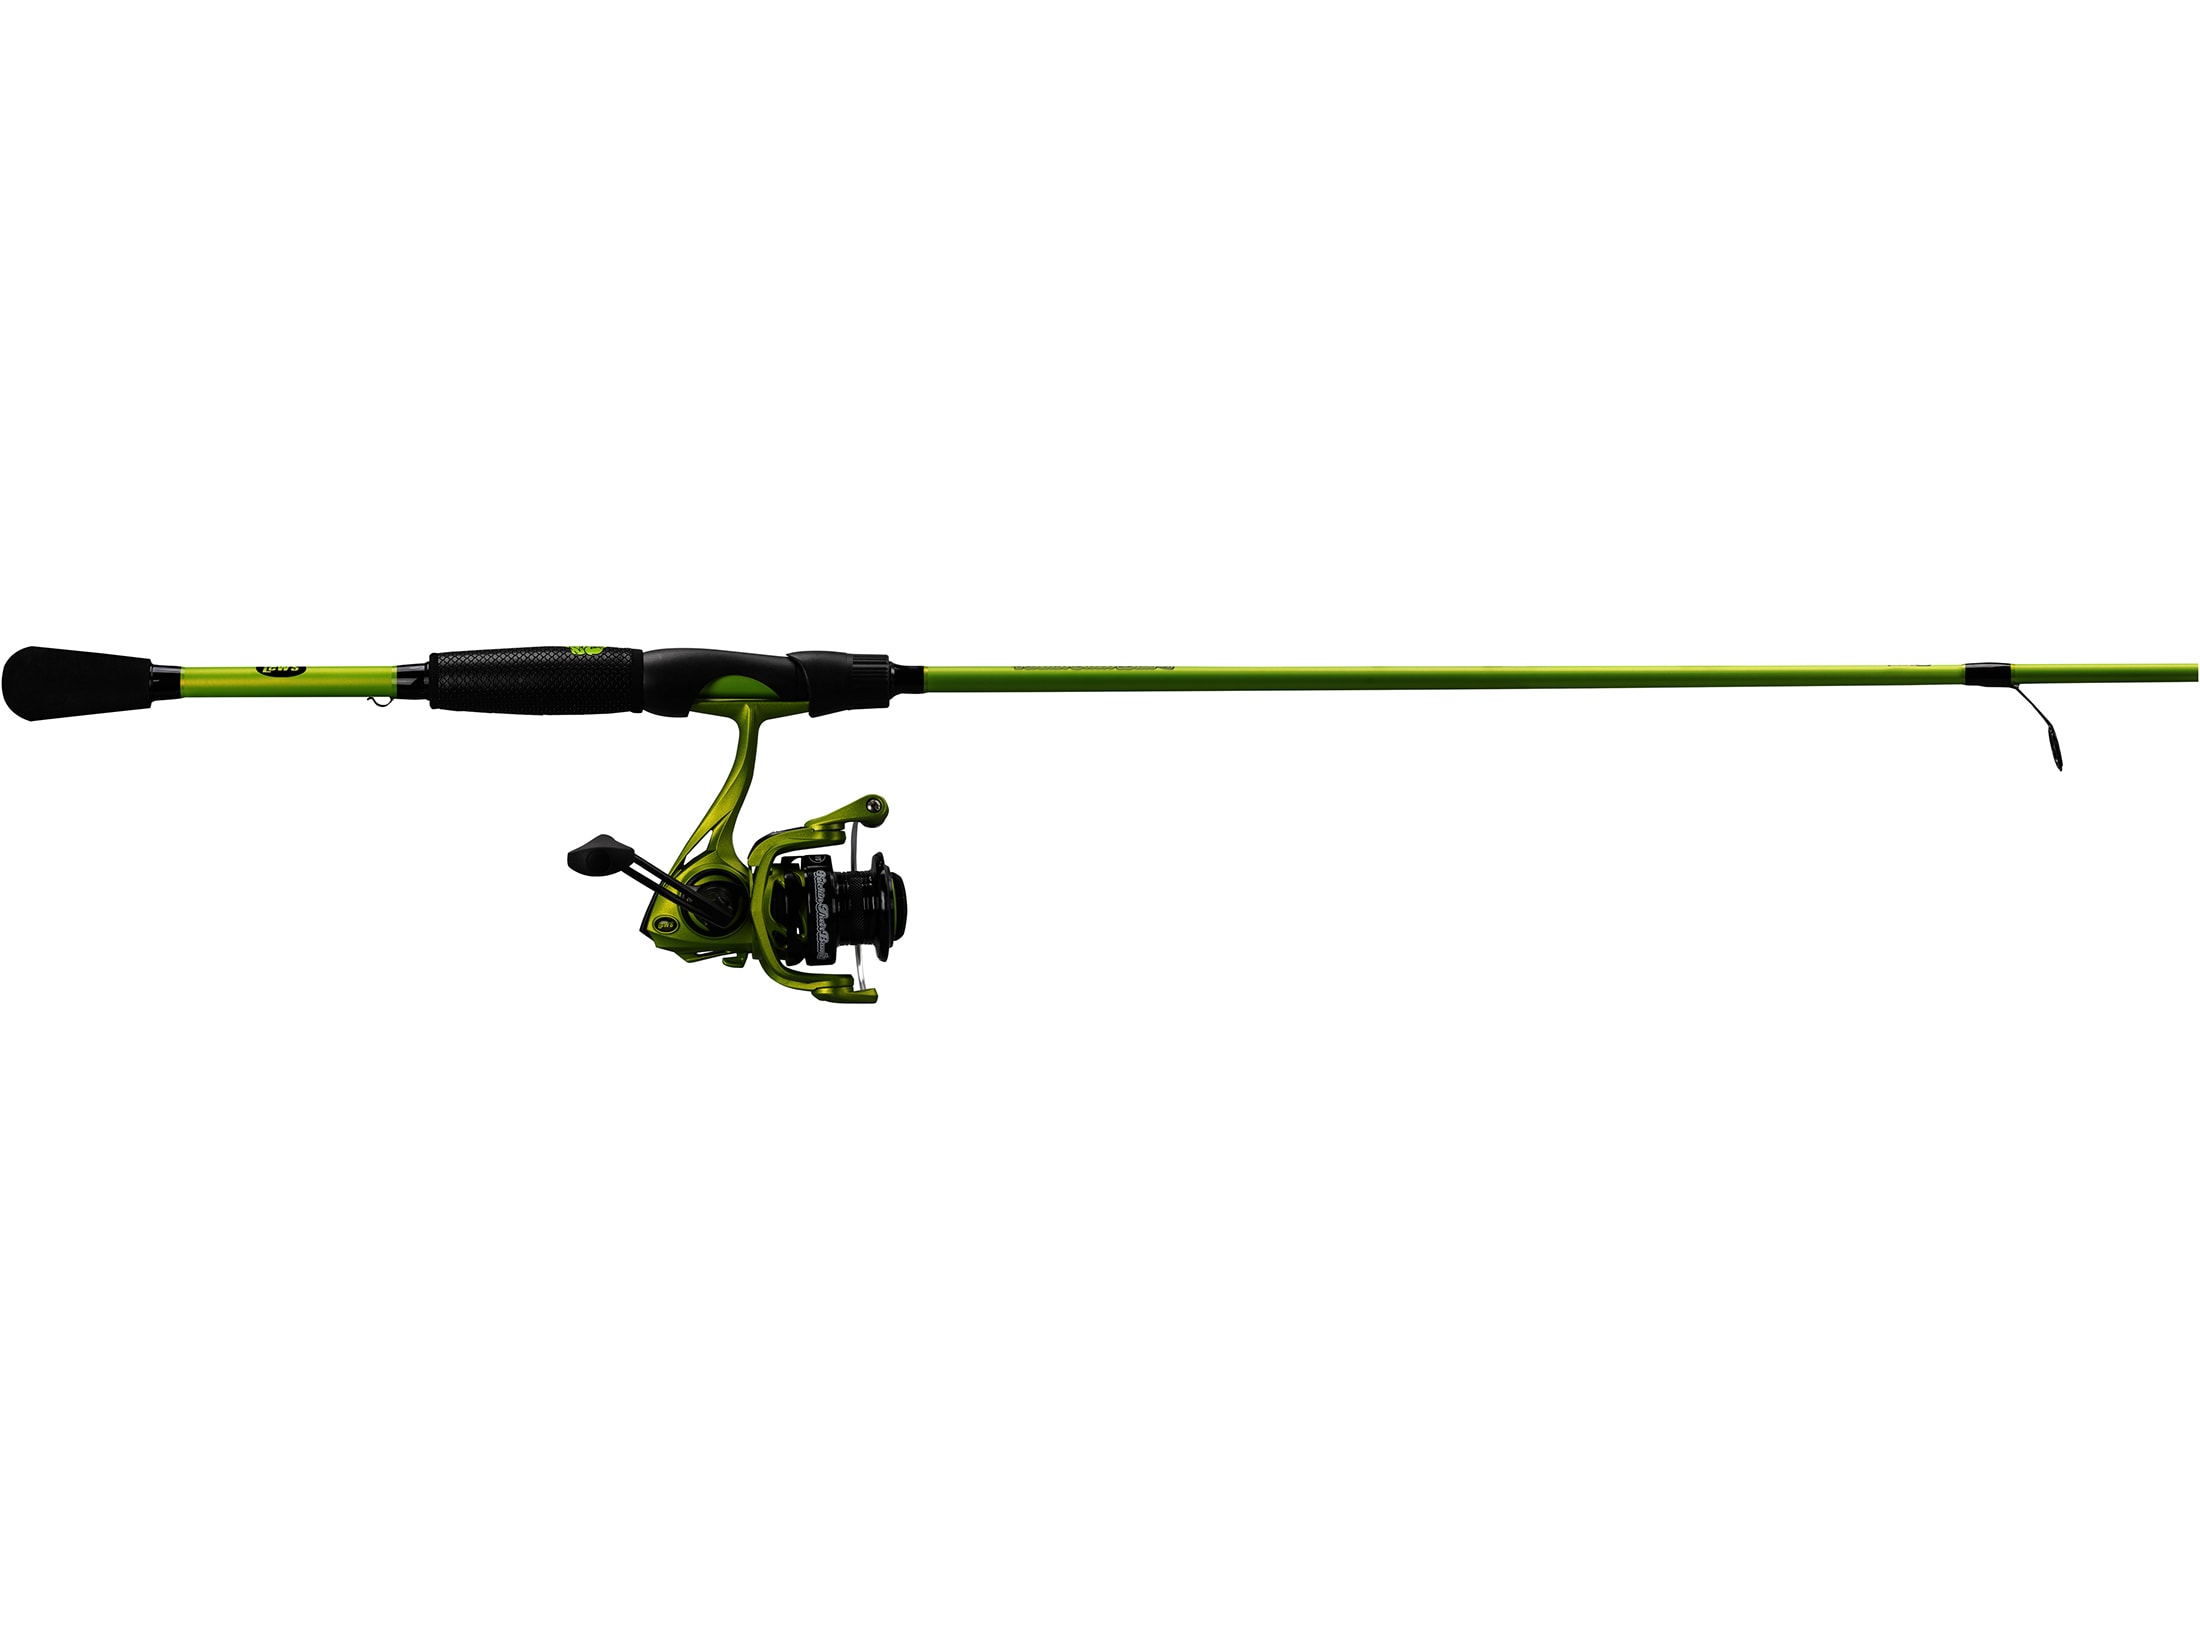 Fishing Combos From Kickin Their Bass TV Lew's Fishing, 51% OFF